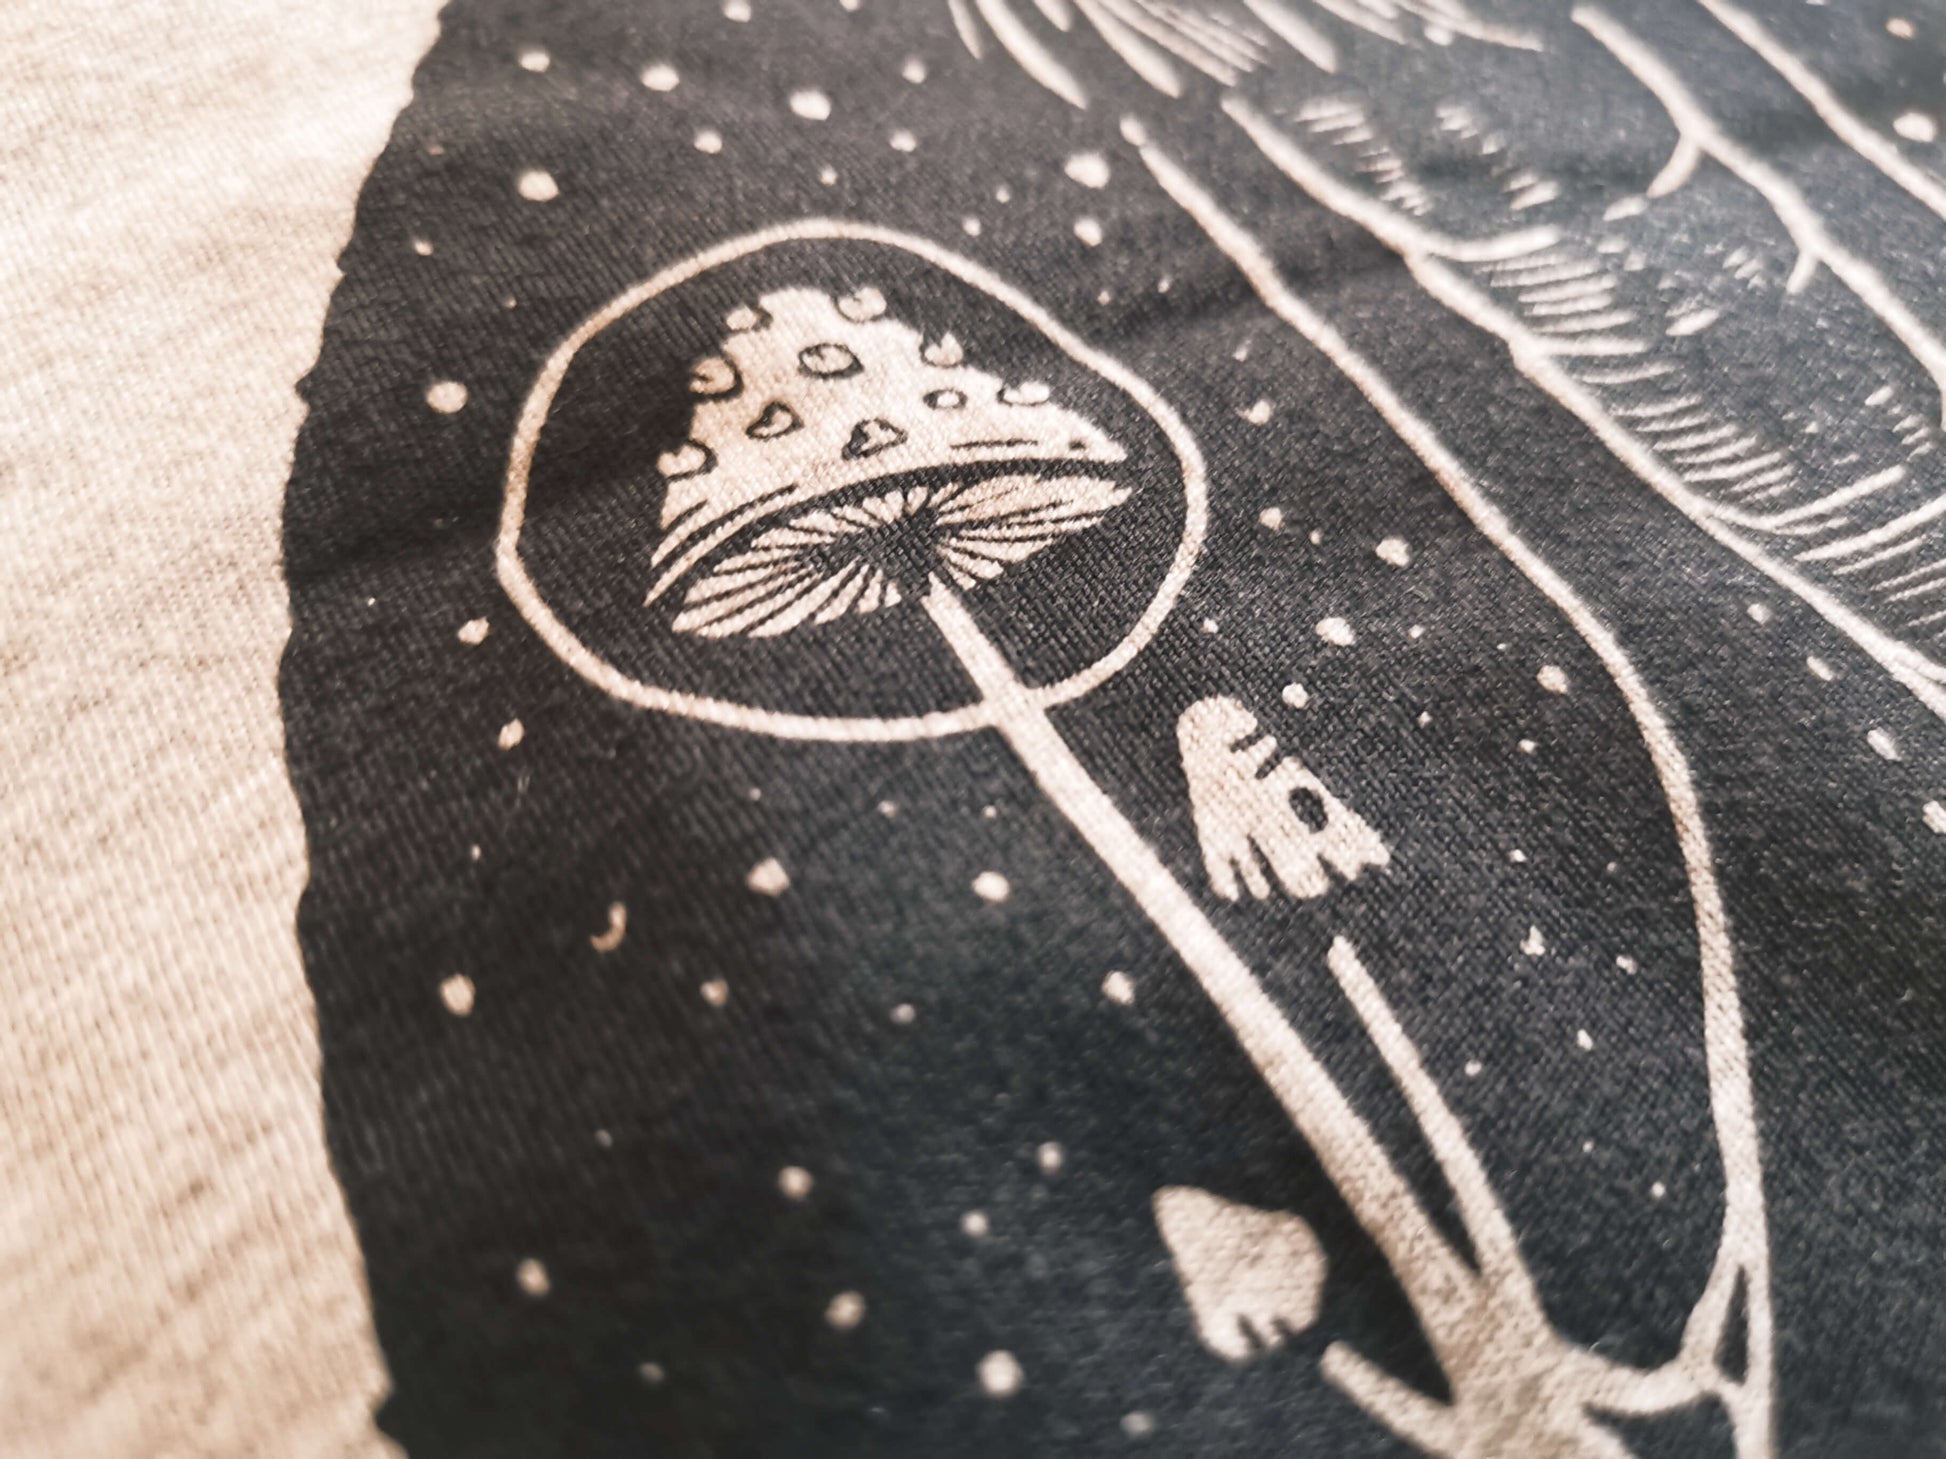 Close up to the mushroom detail on our goblincore goth t-shirt.